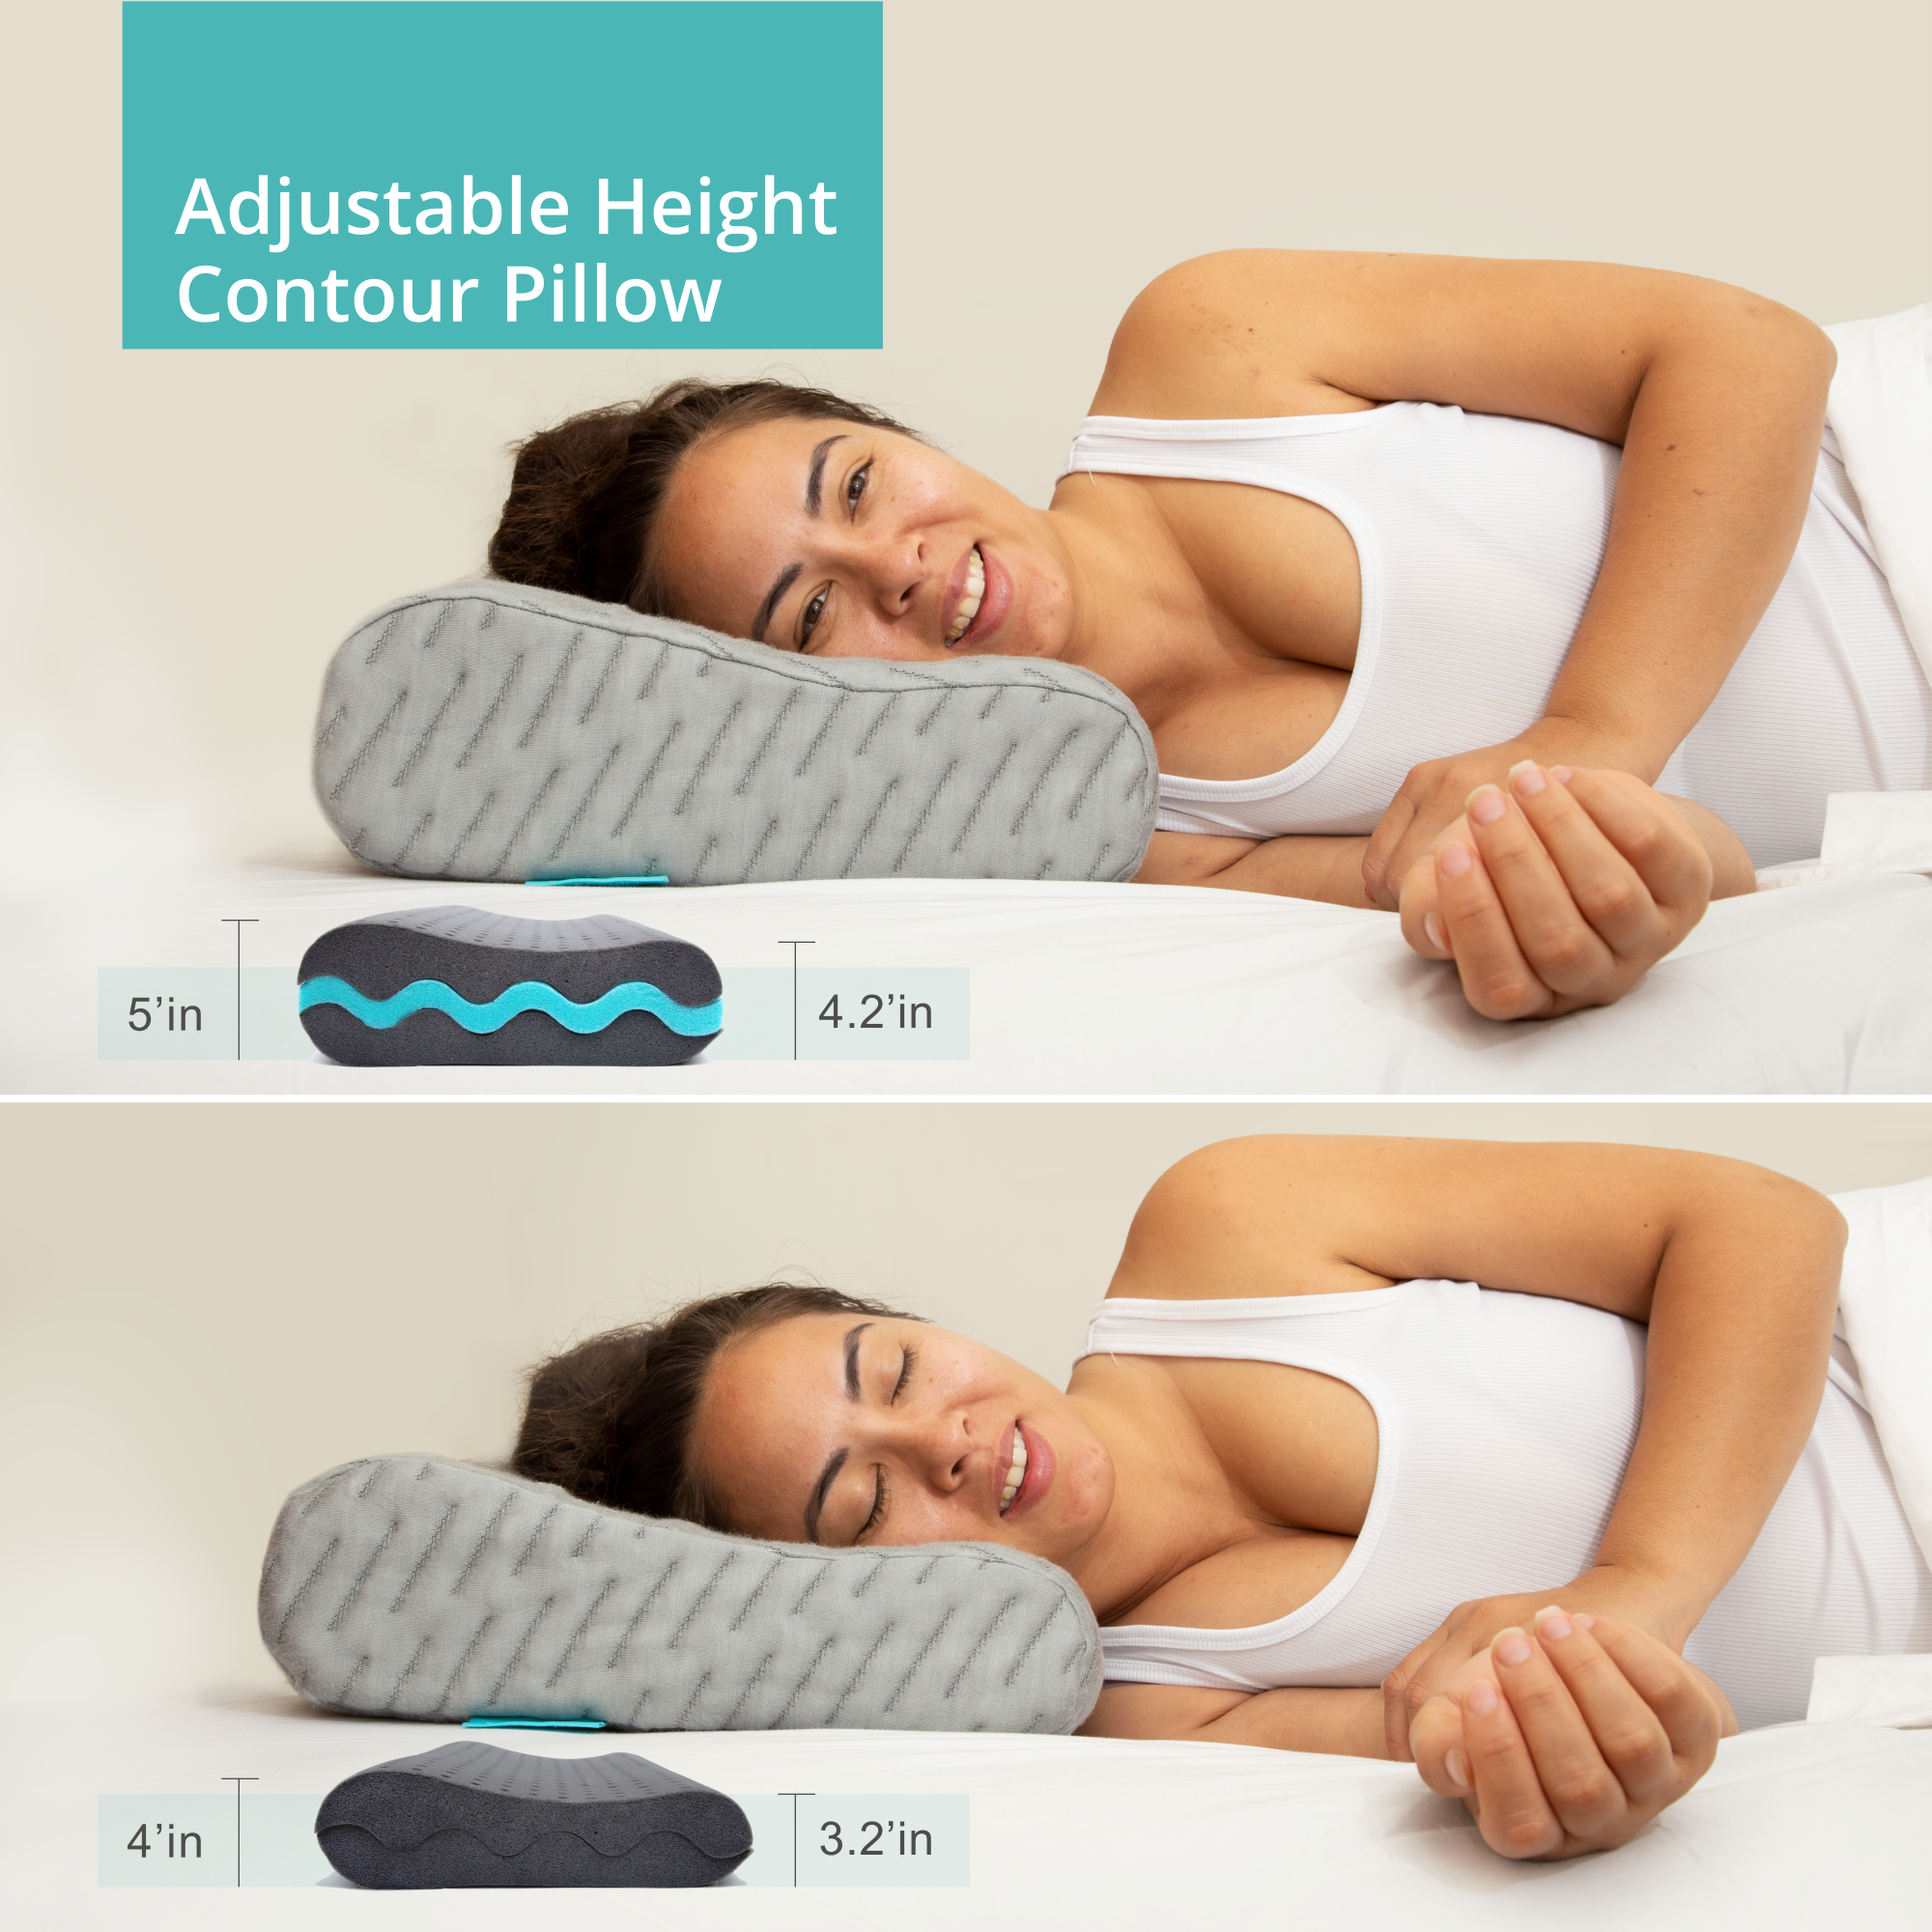 Contour Pillow for side sleeping - Adjustable Height with removable layer